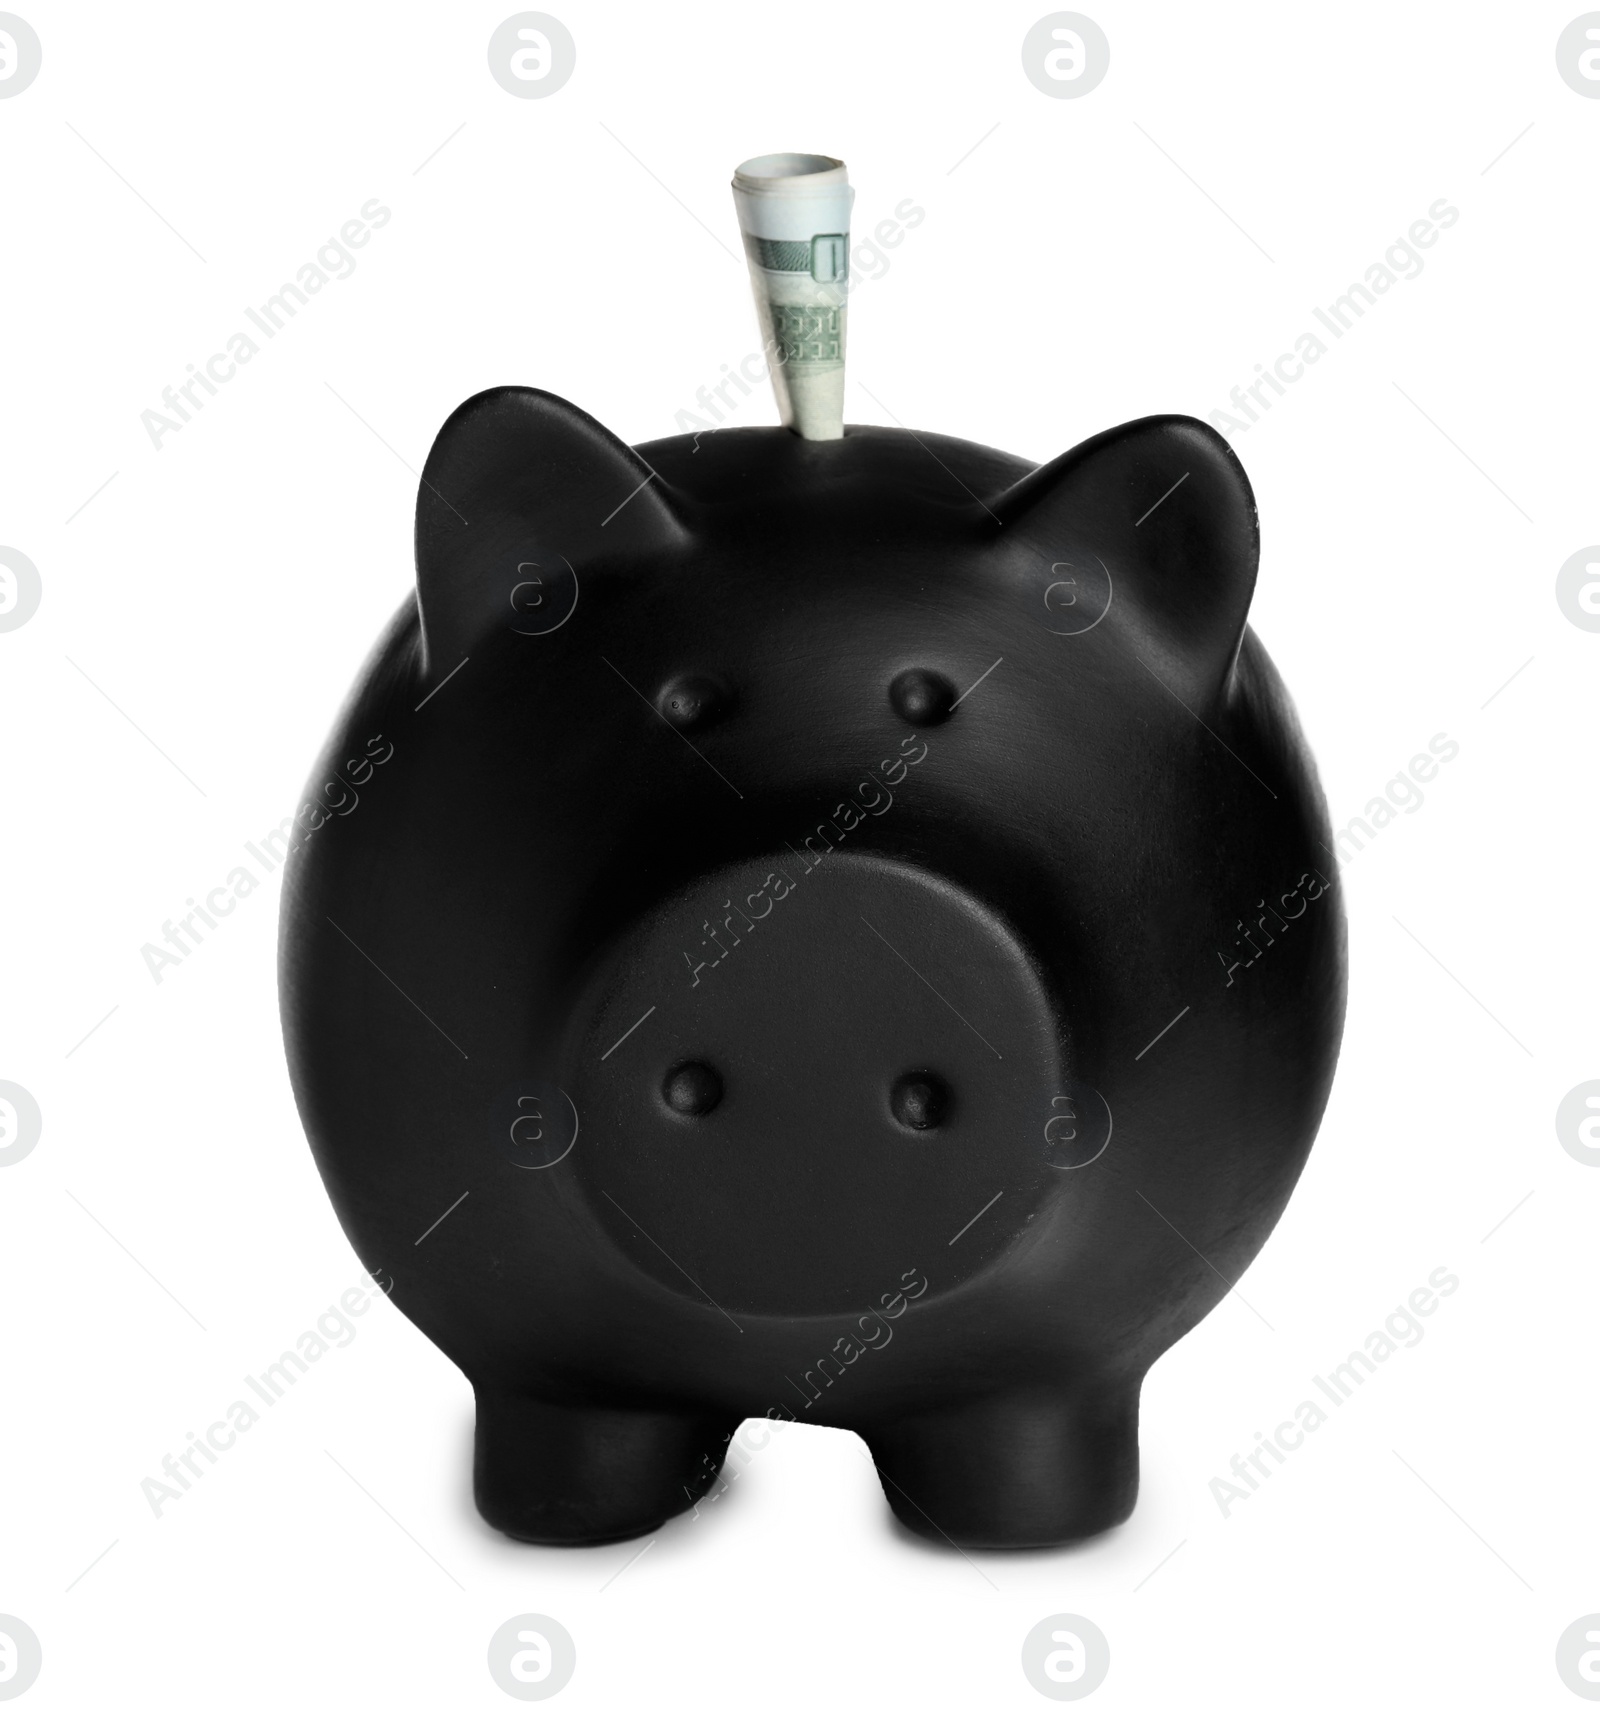 Photo of Piggy bank with money on white background